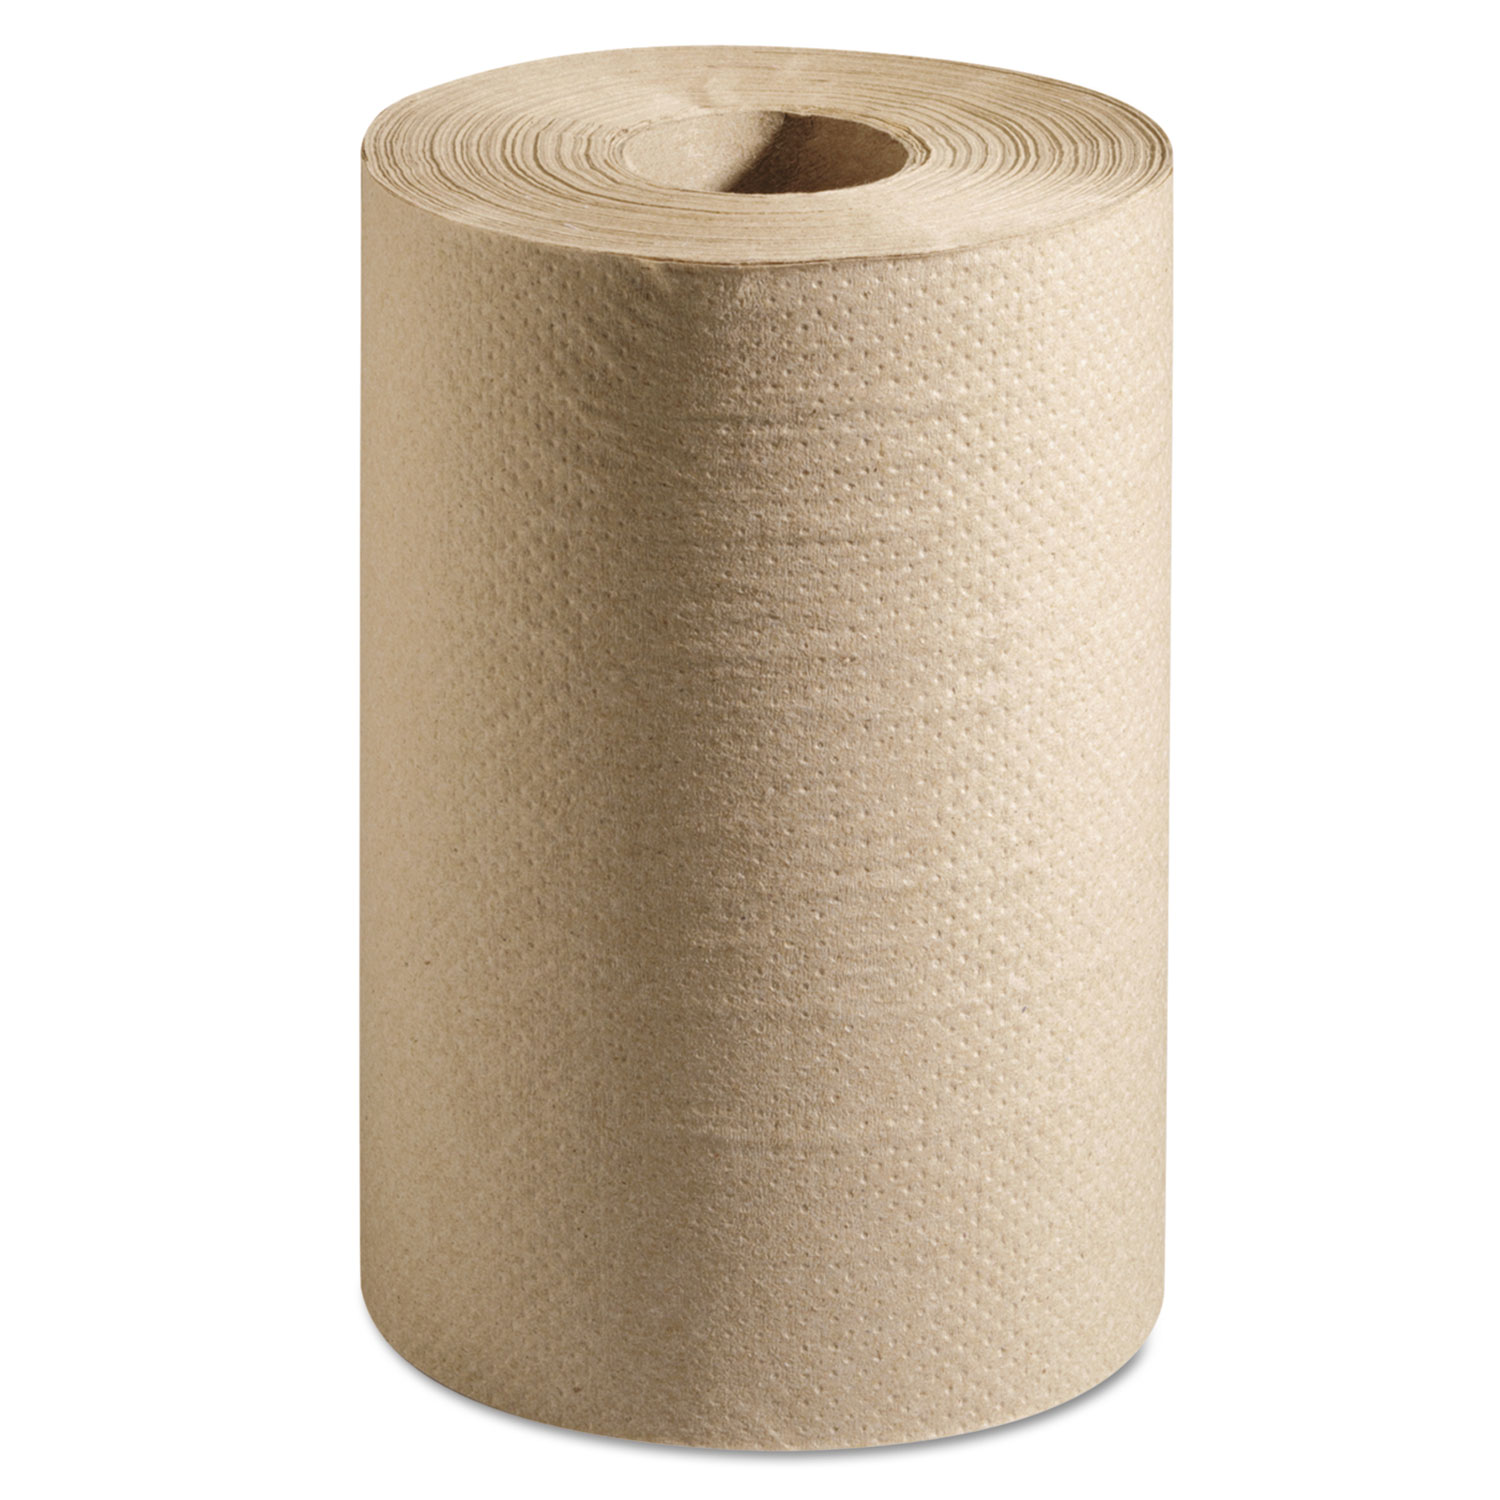  Marcal PRO P720N 100% Recycled Hardwound Roll Paper Towels, 7 7/8 x 350 ft, Natural, 12 Rolls/Ct (MRCP720N) 